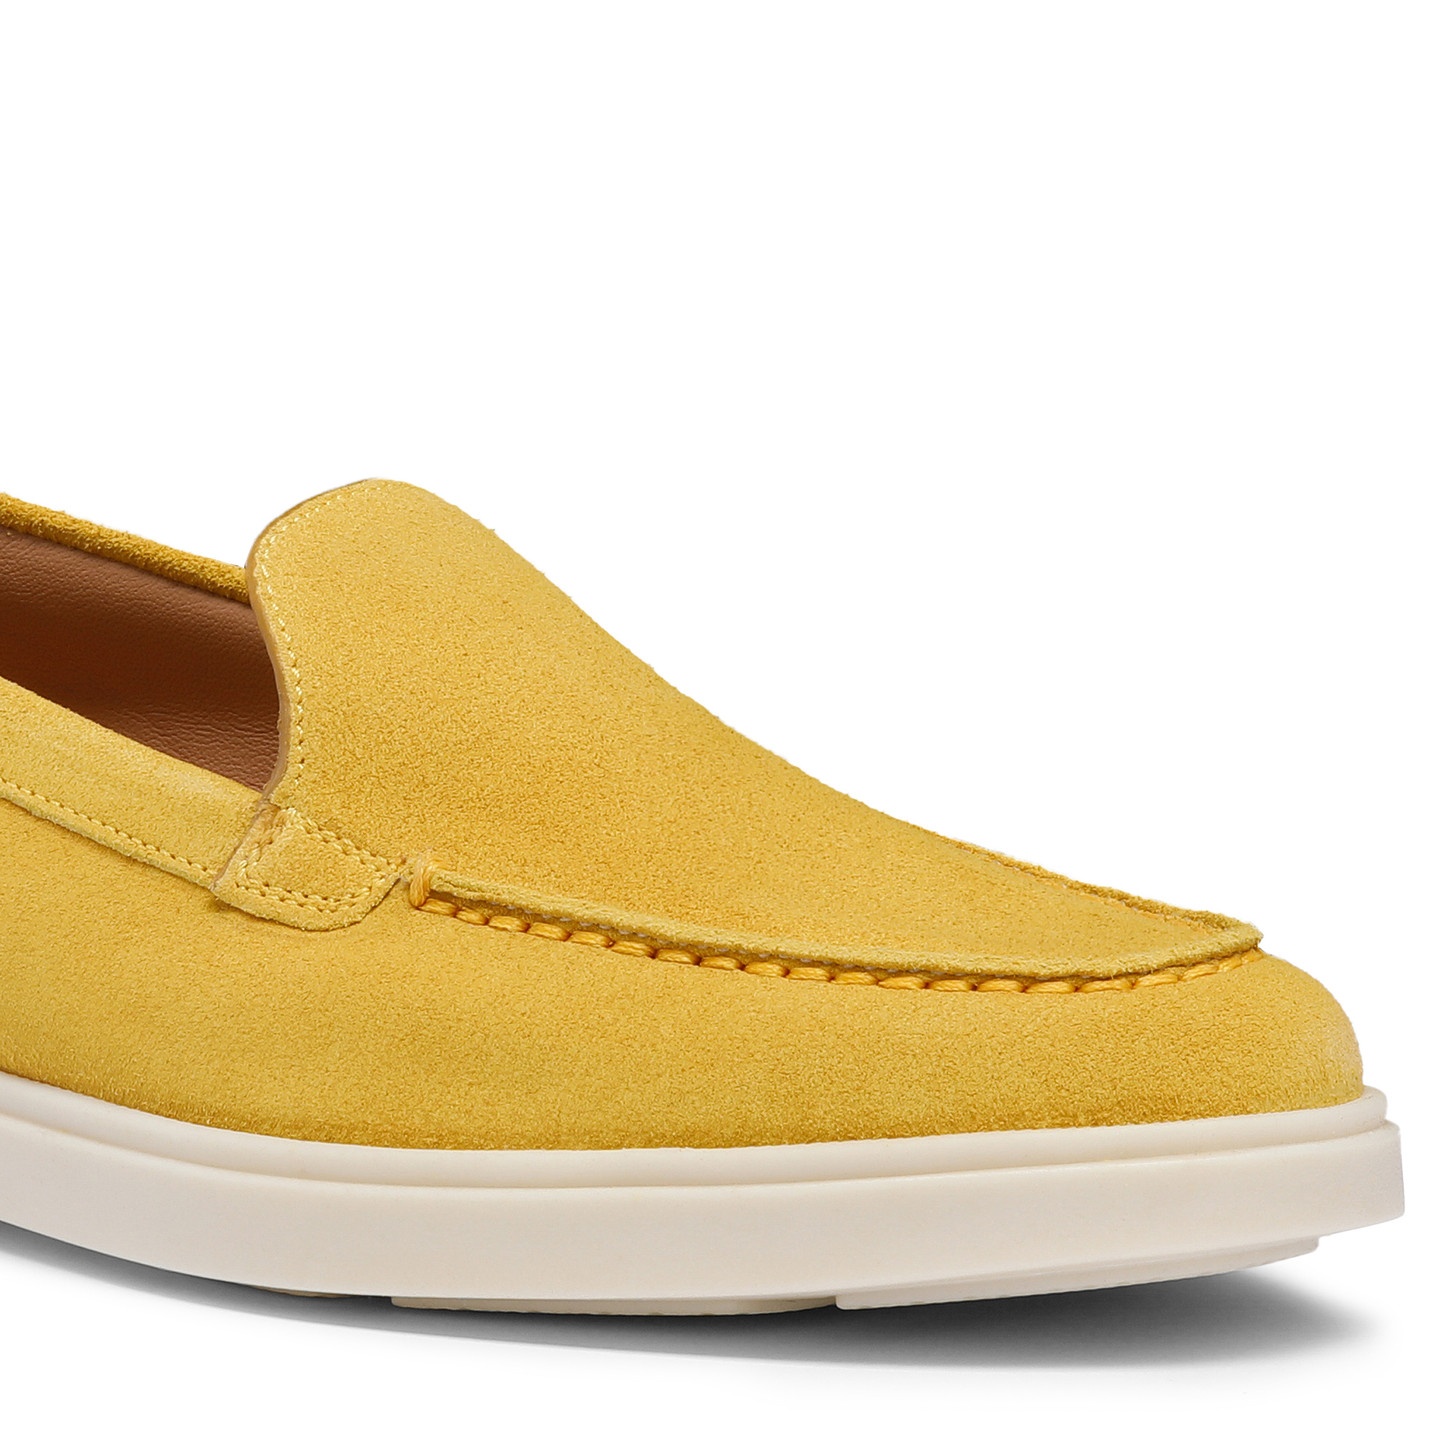 Women's yellow suede loafer - 6